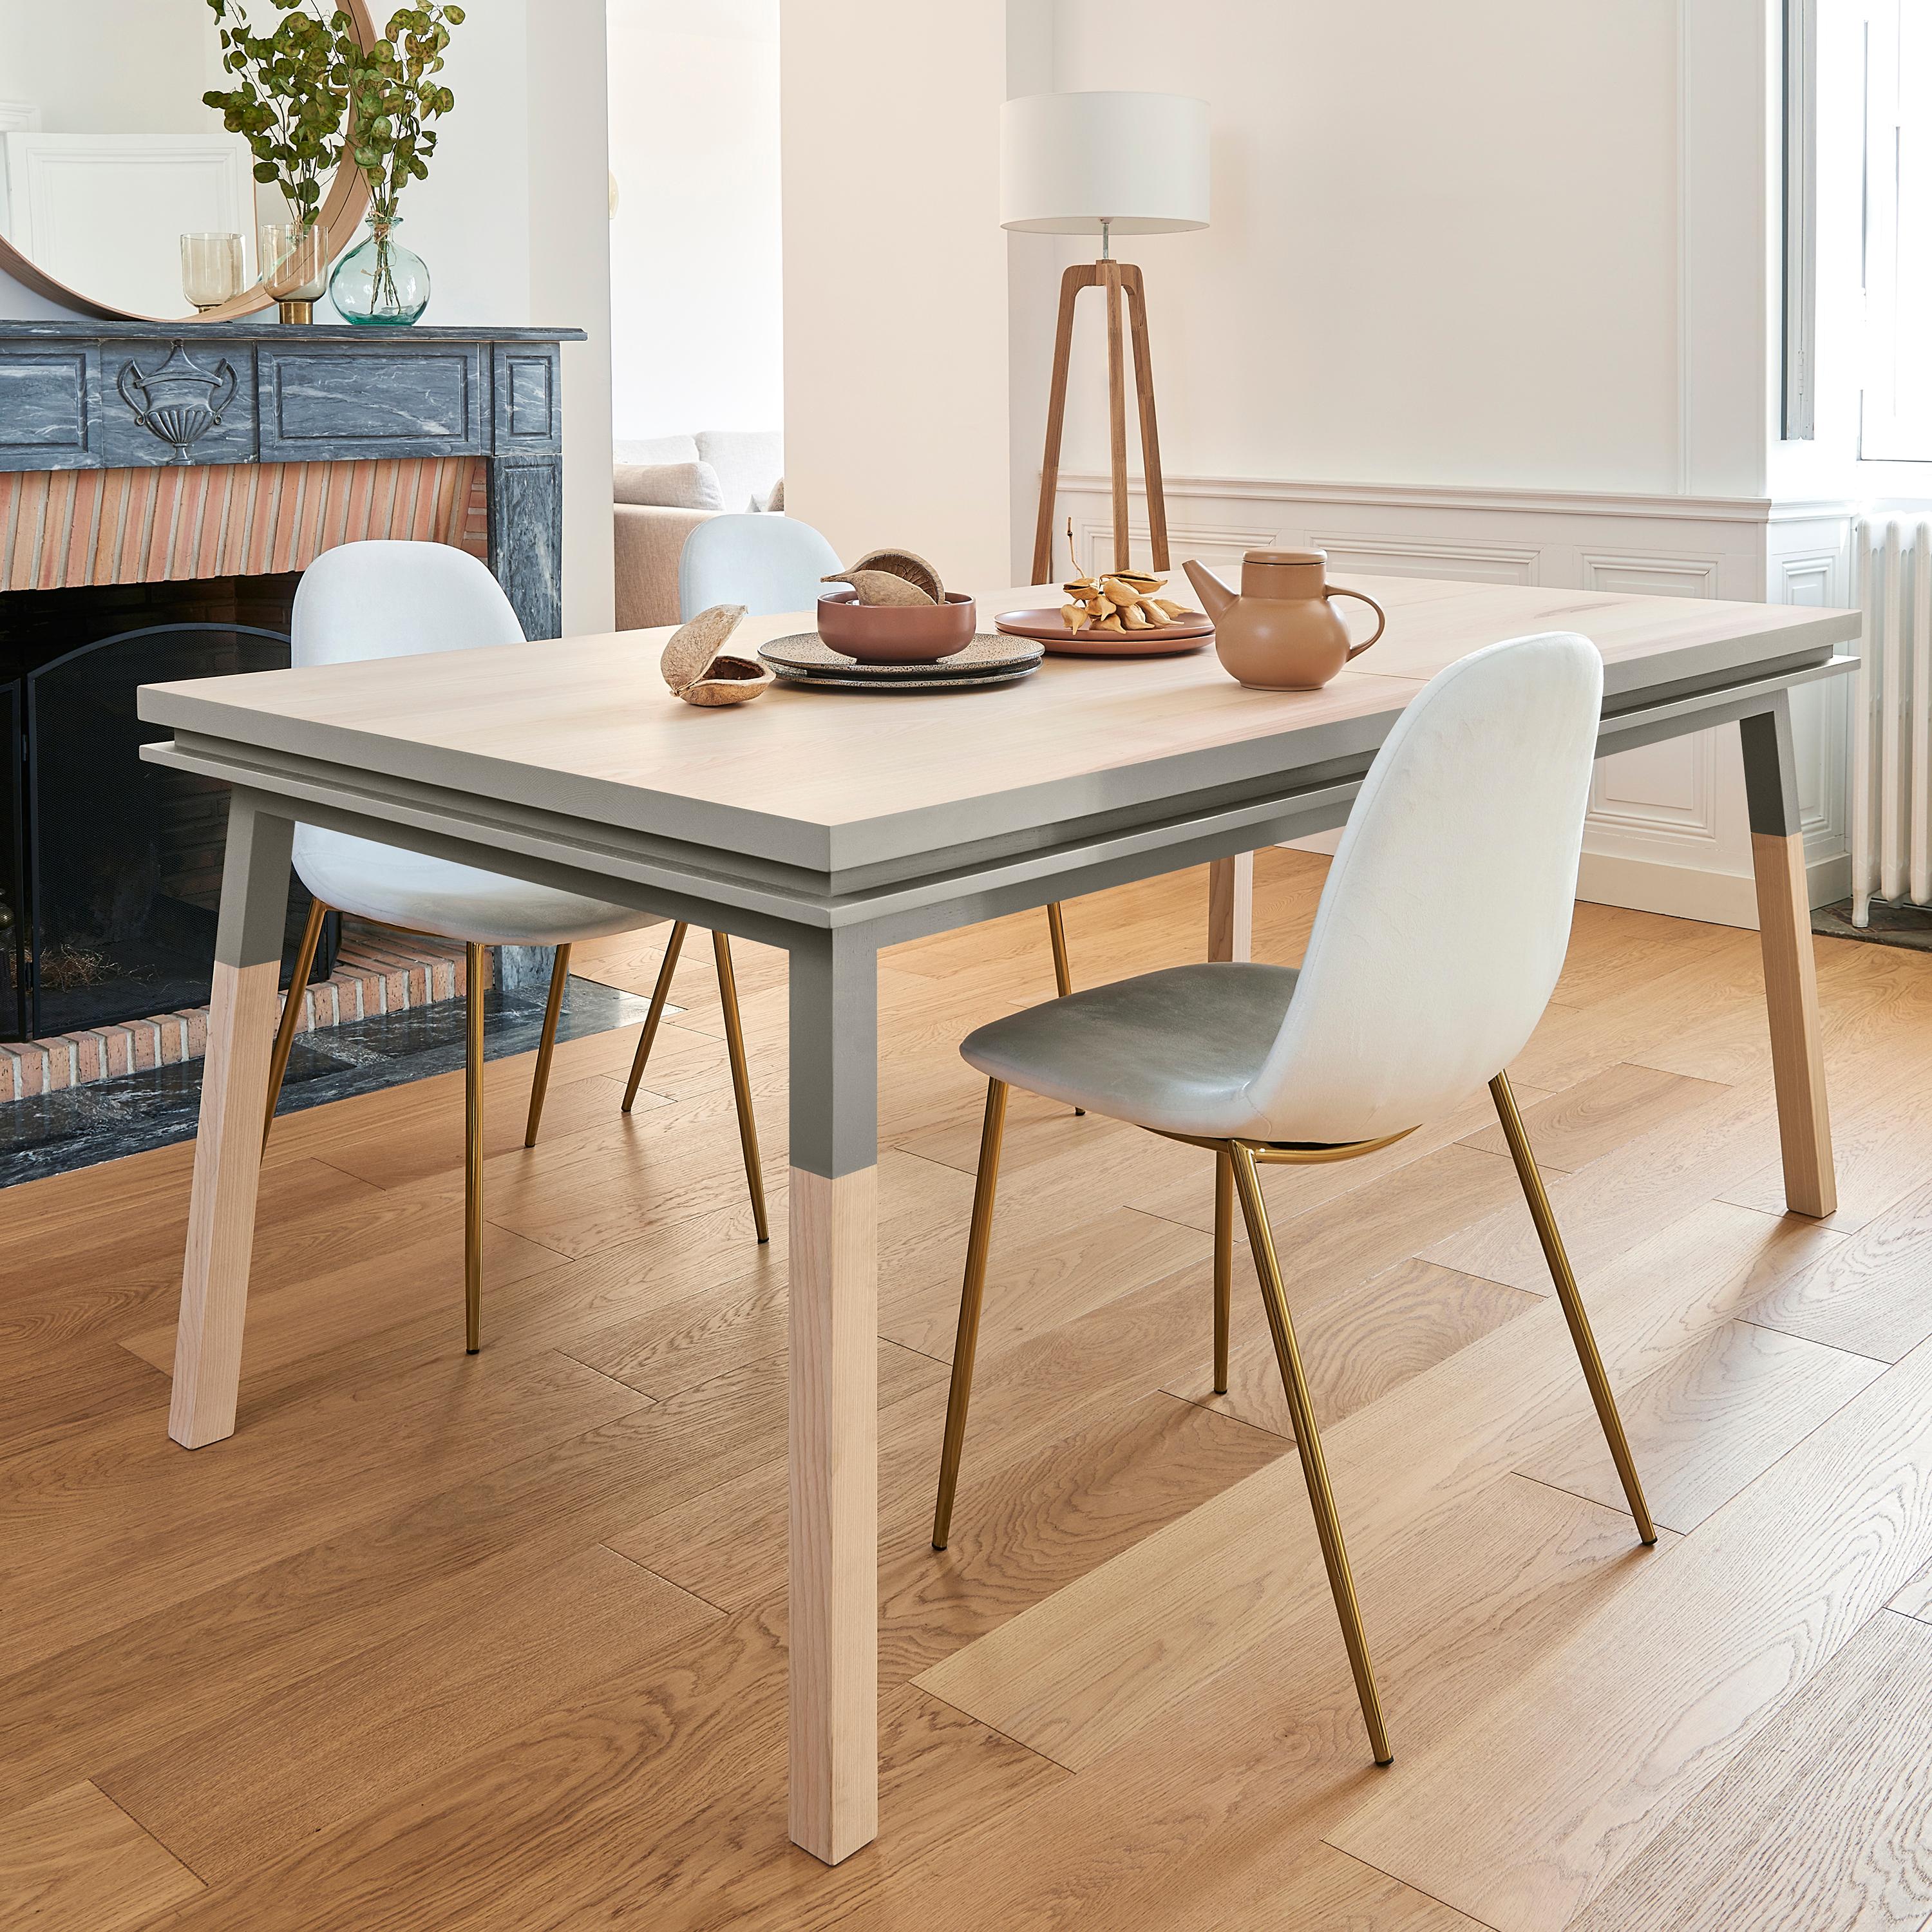 Rectangular dining table designed by Eric Gizard - Paris, France. This table is part of the ÉGÉE collection, that combines the sleek and refined codes of Scandinavian design with natural materials and 